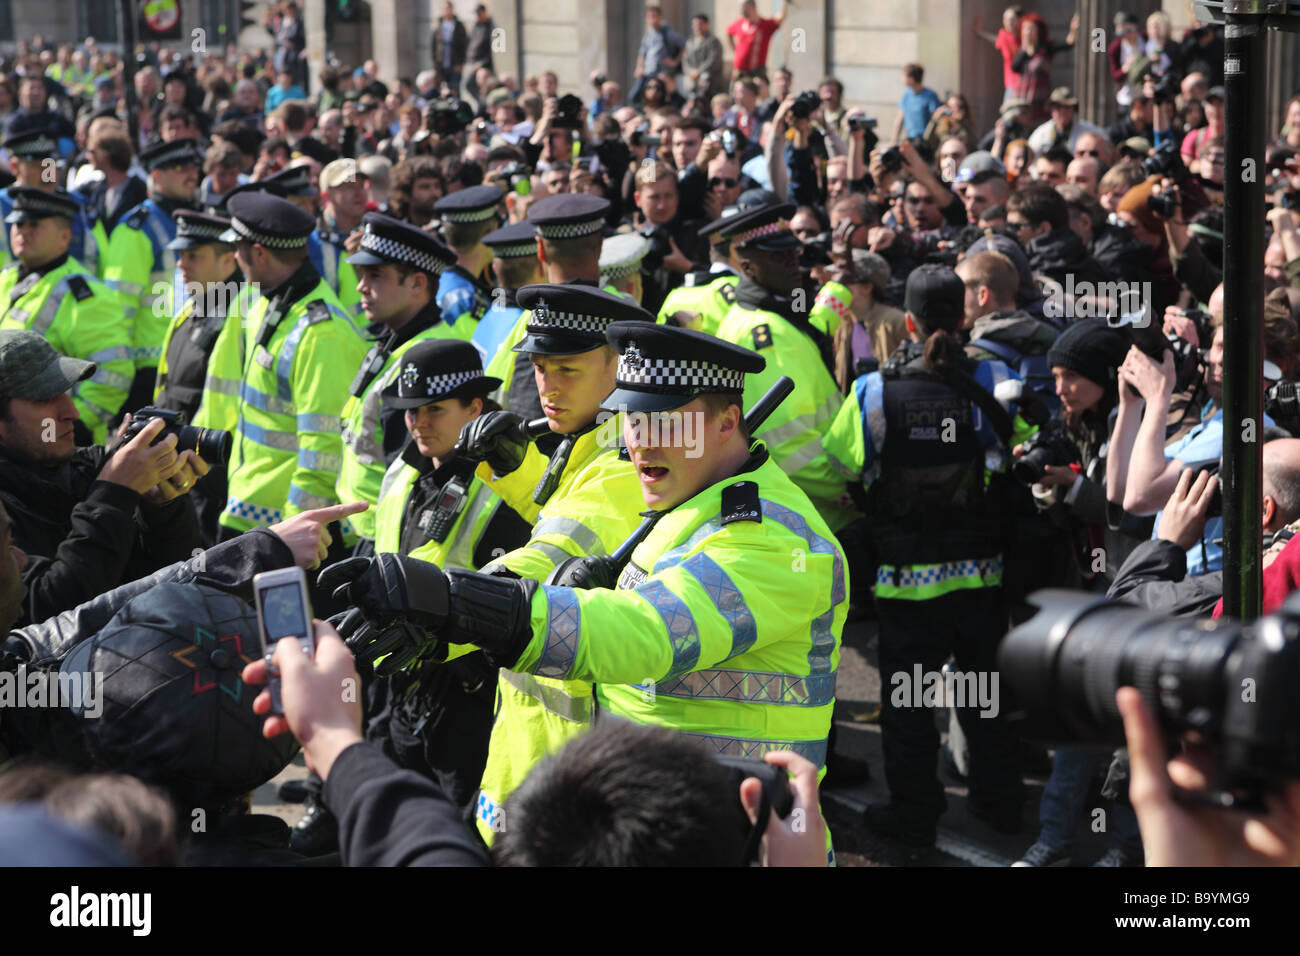 Protesters and police clash outside the Bank of England during the 2009 G20 summit, London, UK. Stock Photo